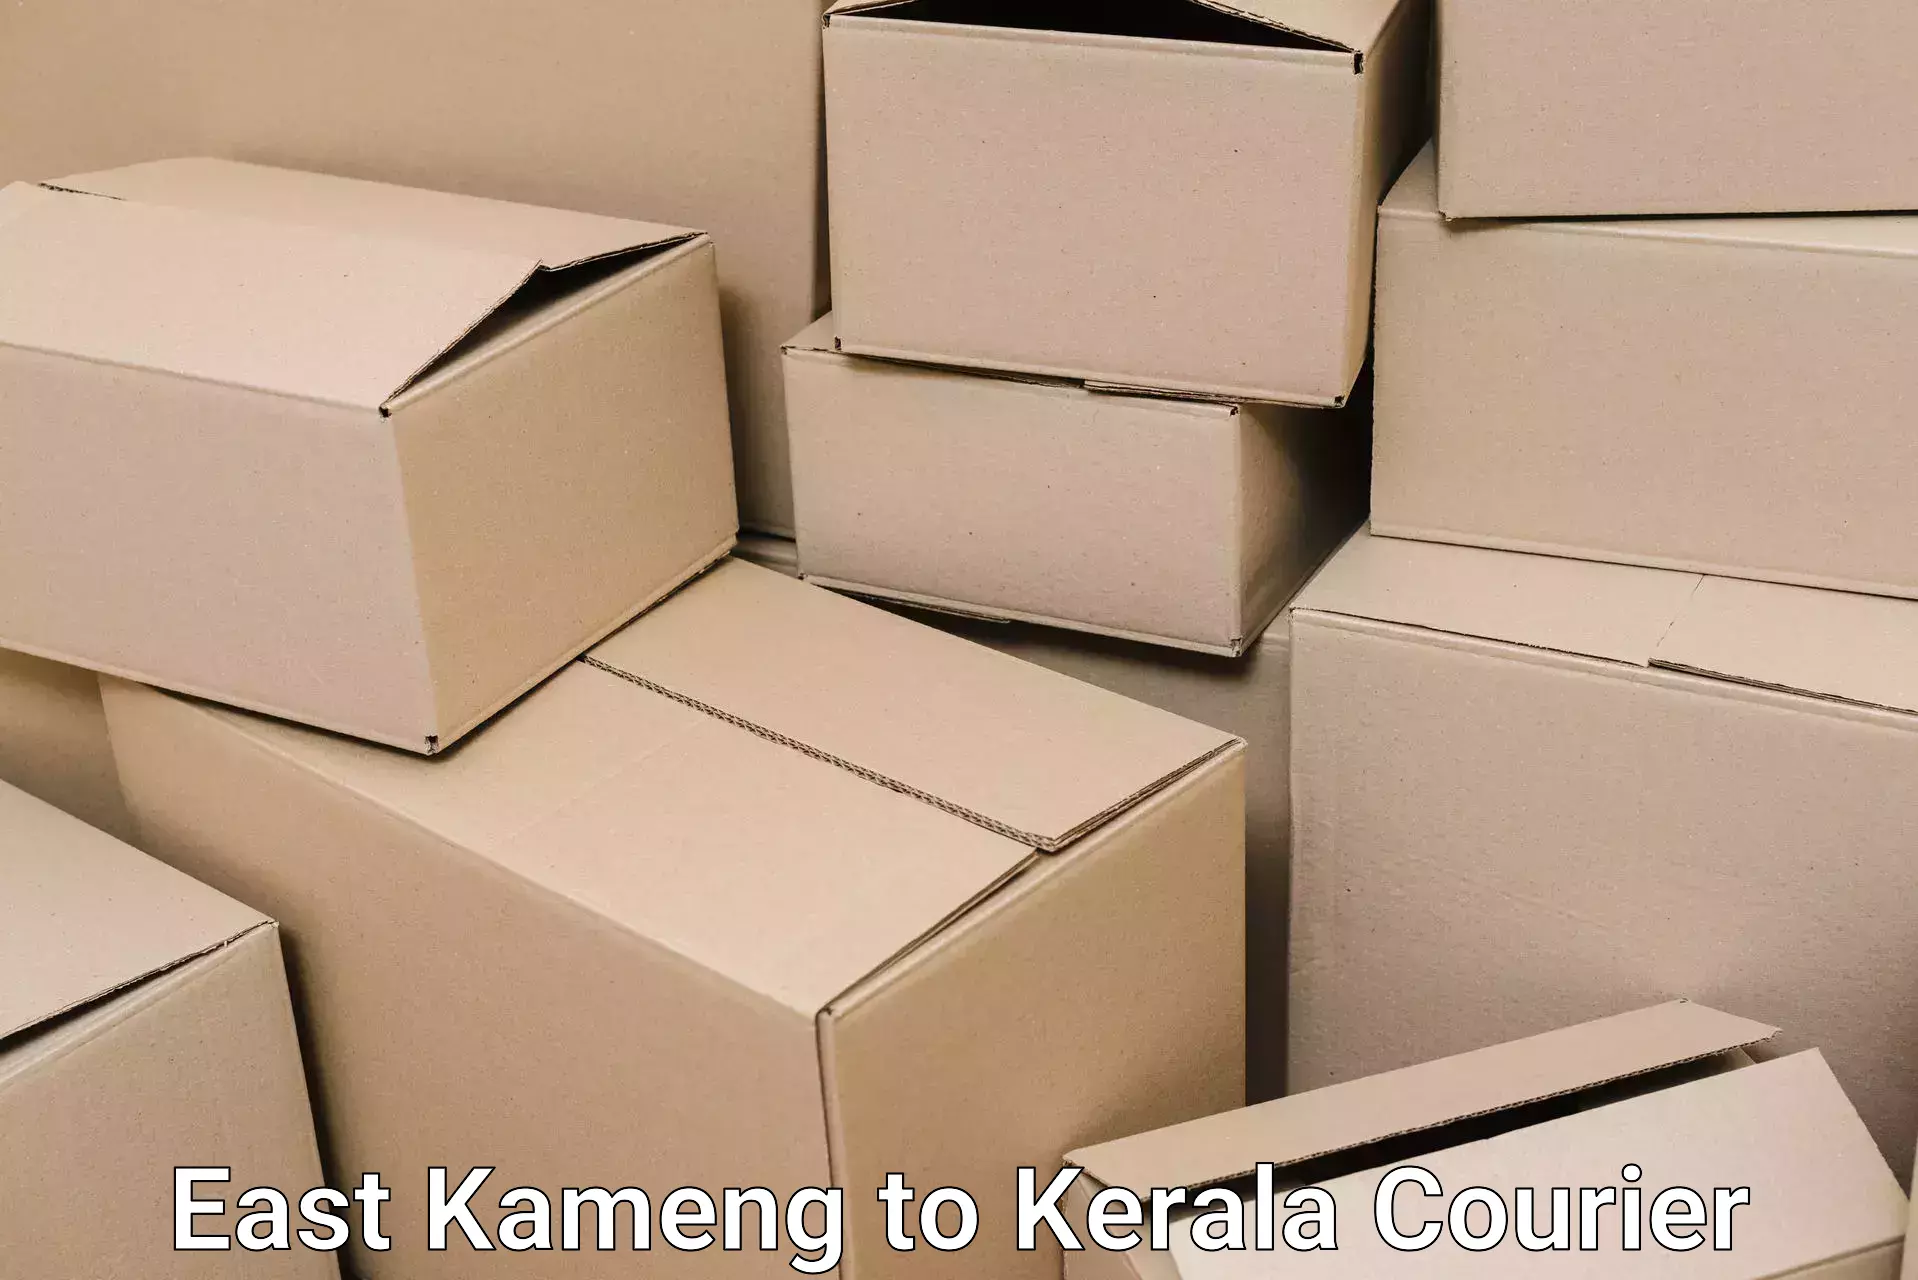 Quality relocation services in East Kameng to Kottayam